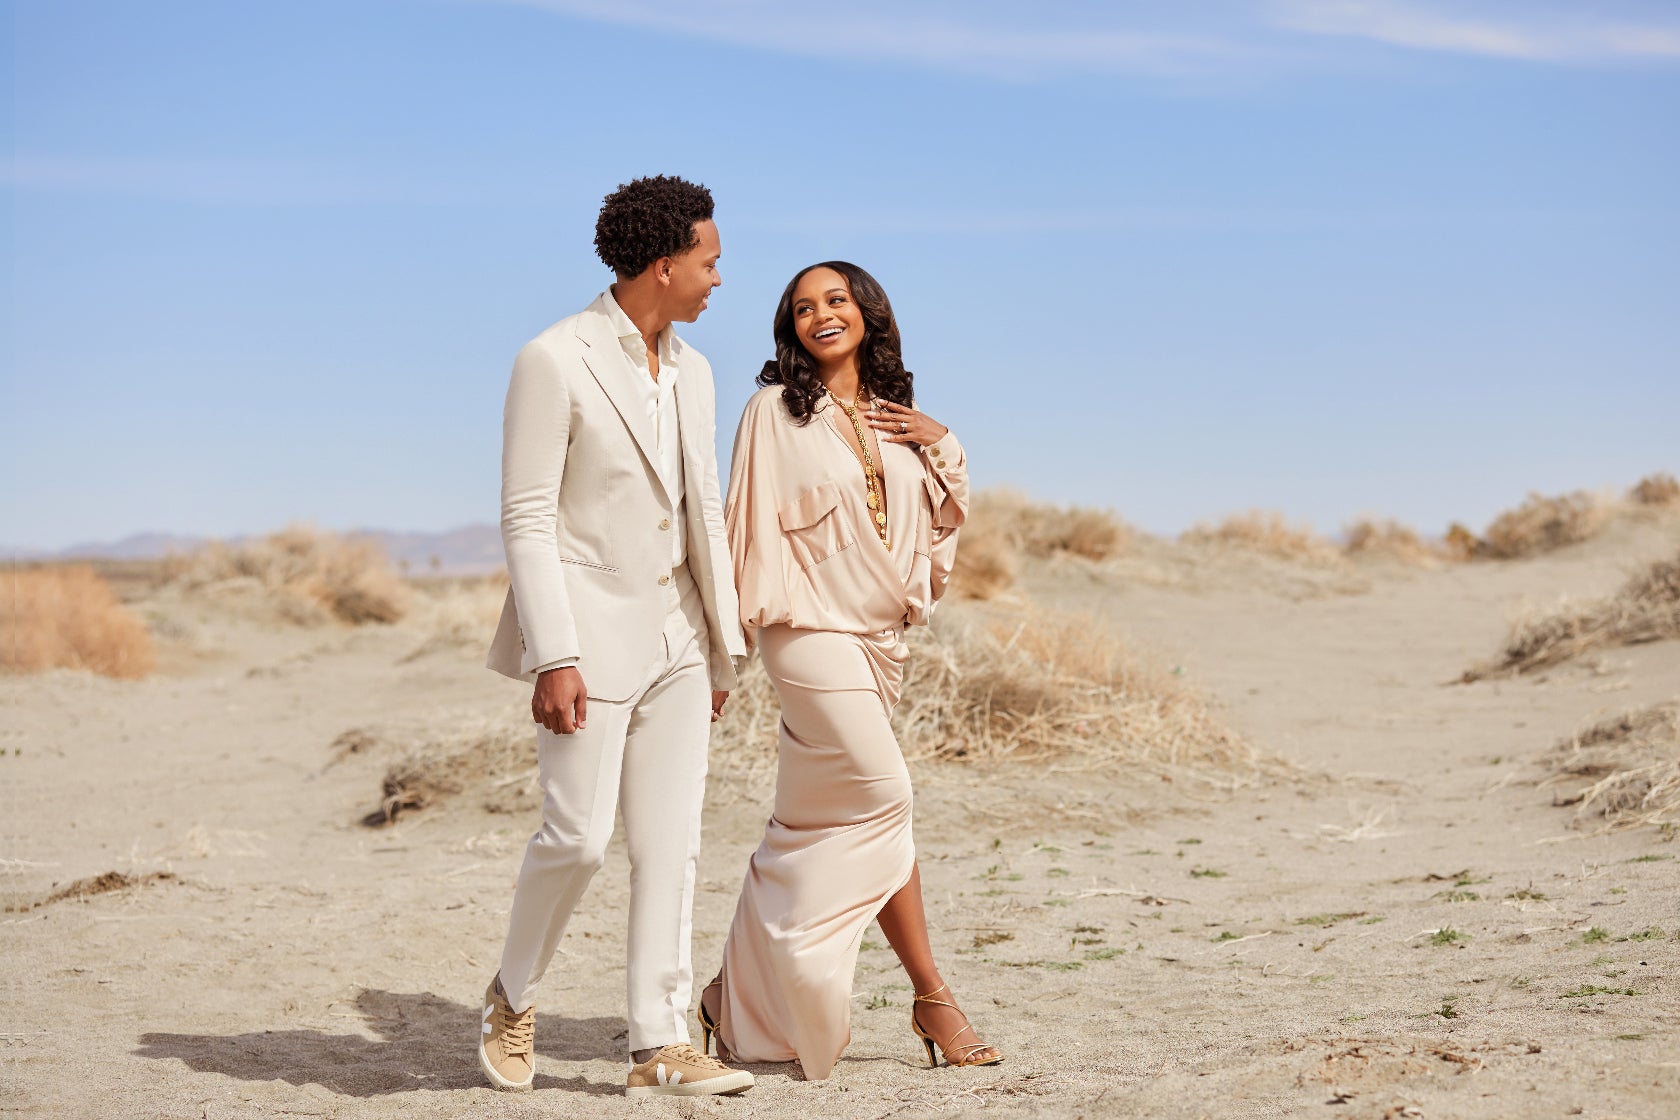 Vanessa Bell Calloway's Daughter Announces Engagement With Gorgeous High Fashion Shoot In The Desert